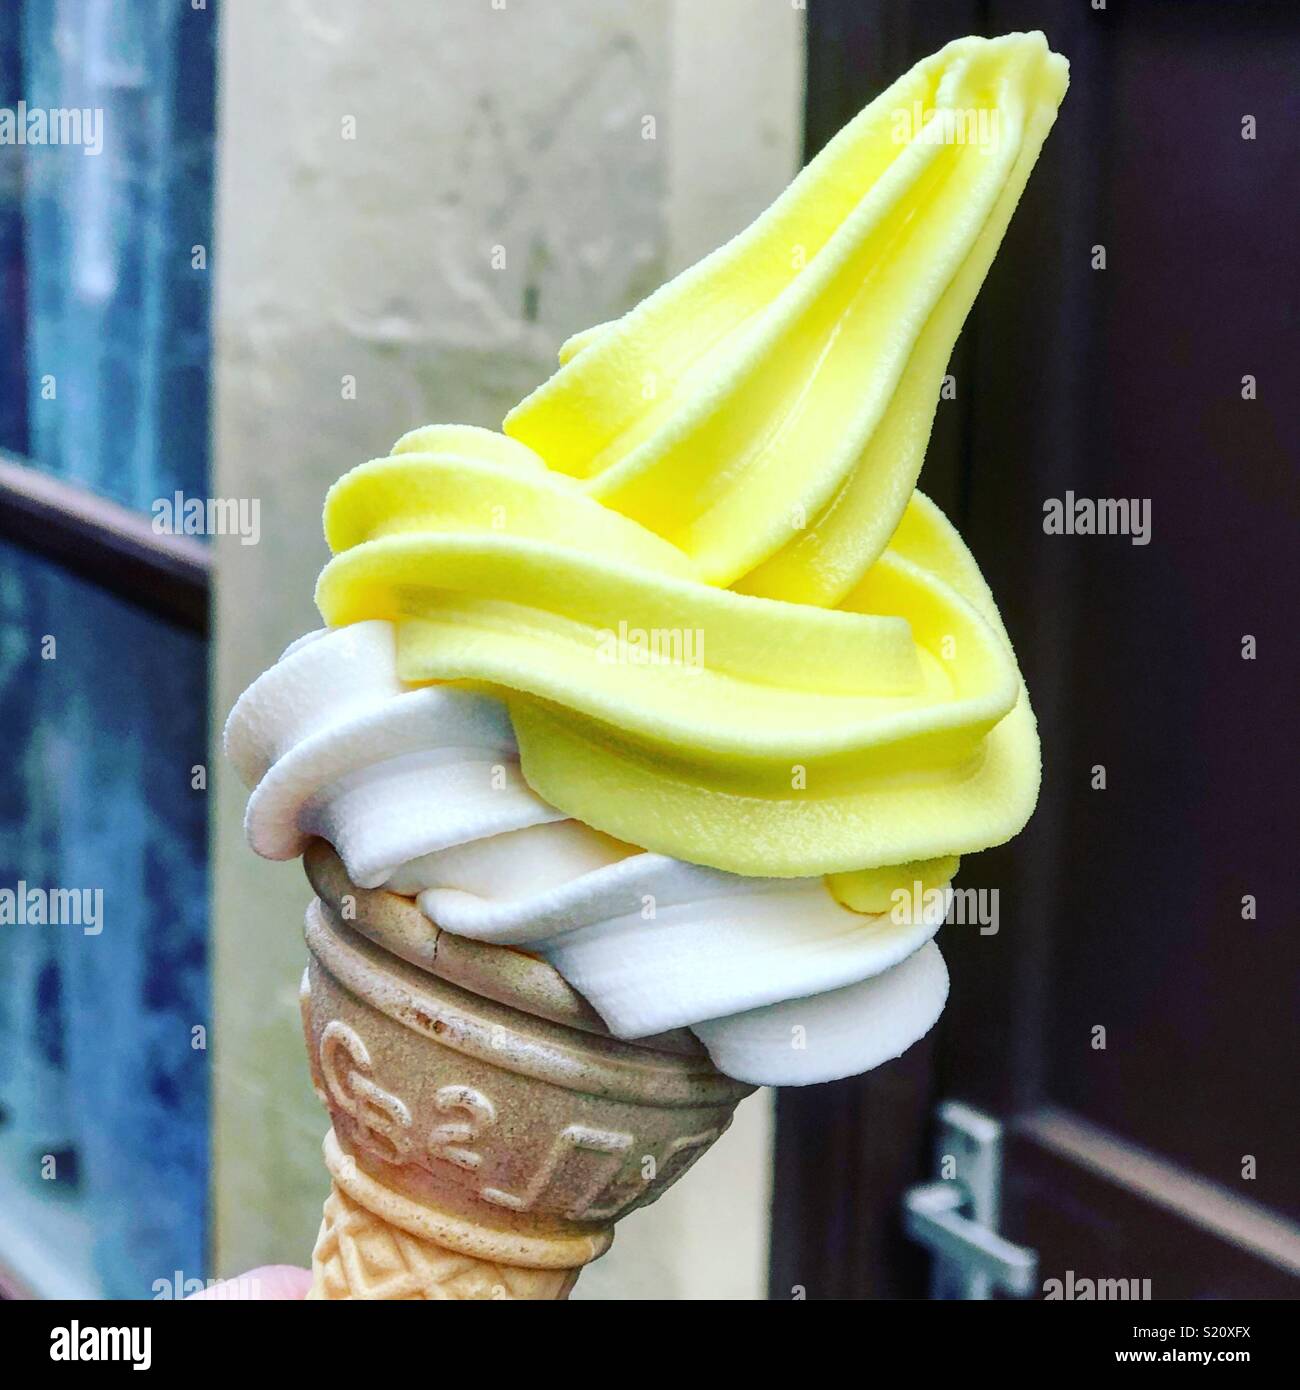 Scoop of refreshing lemon sorbet icecream with zest and mint on a white  background Stock Photo - Alamy